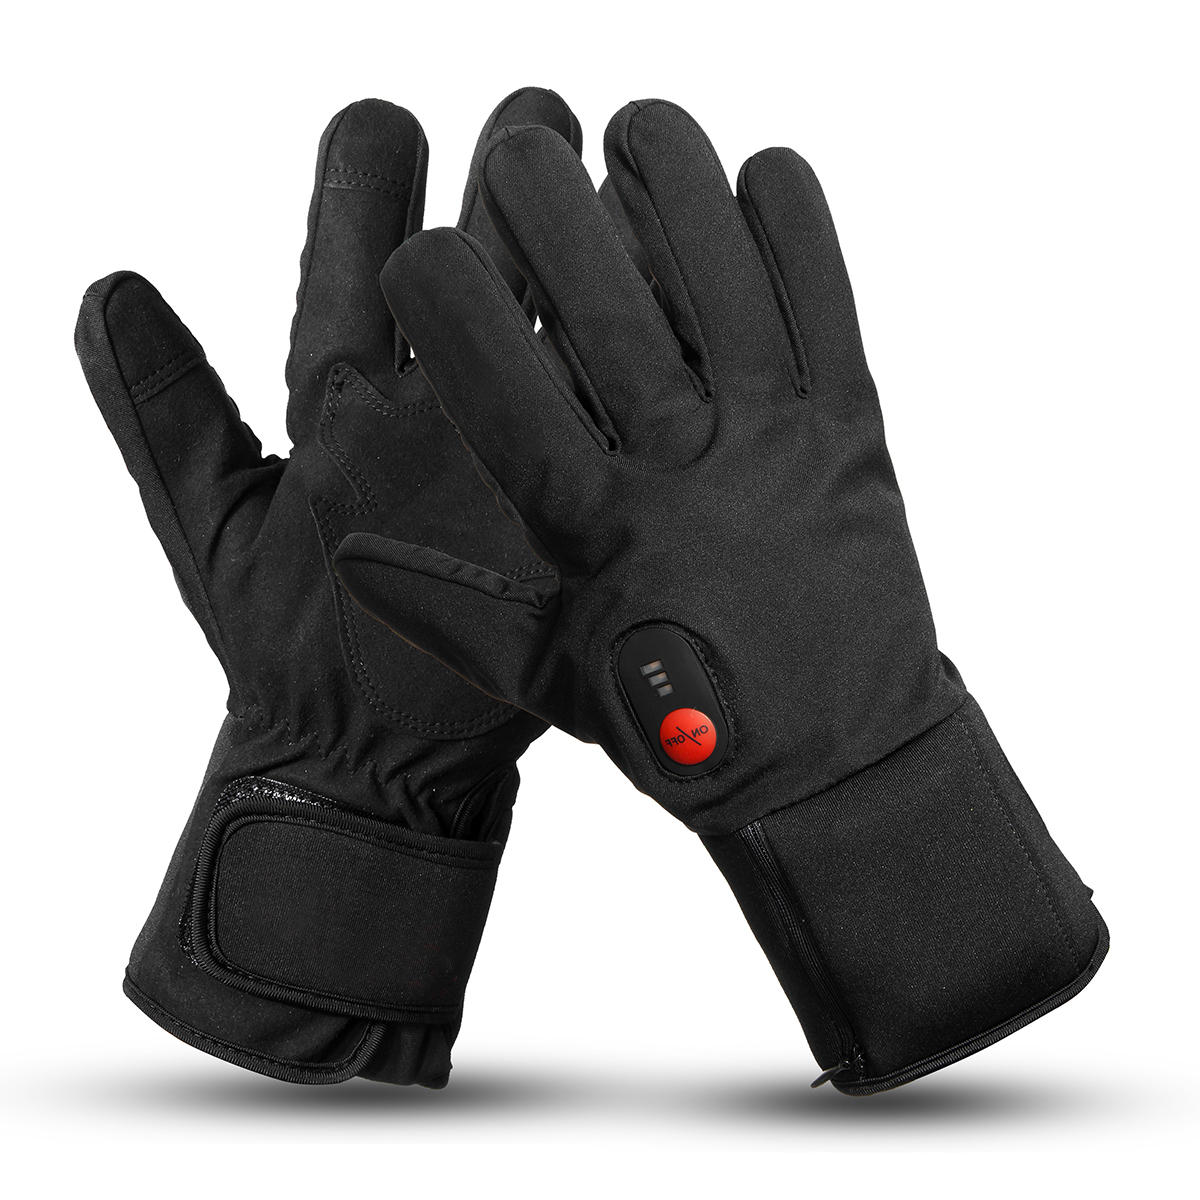 7.4V 2200mah Electric Heated Gloves Motorcycle Winter Warmer Outdoor Skiing 3-Speed Temperature Adju